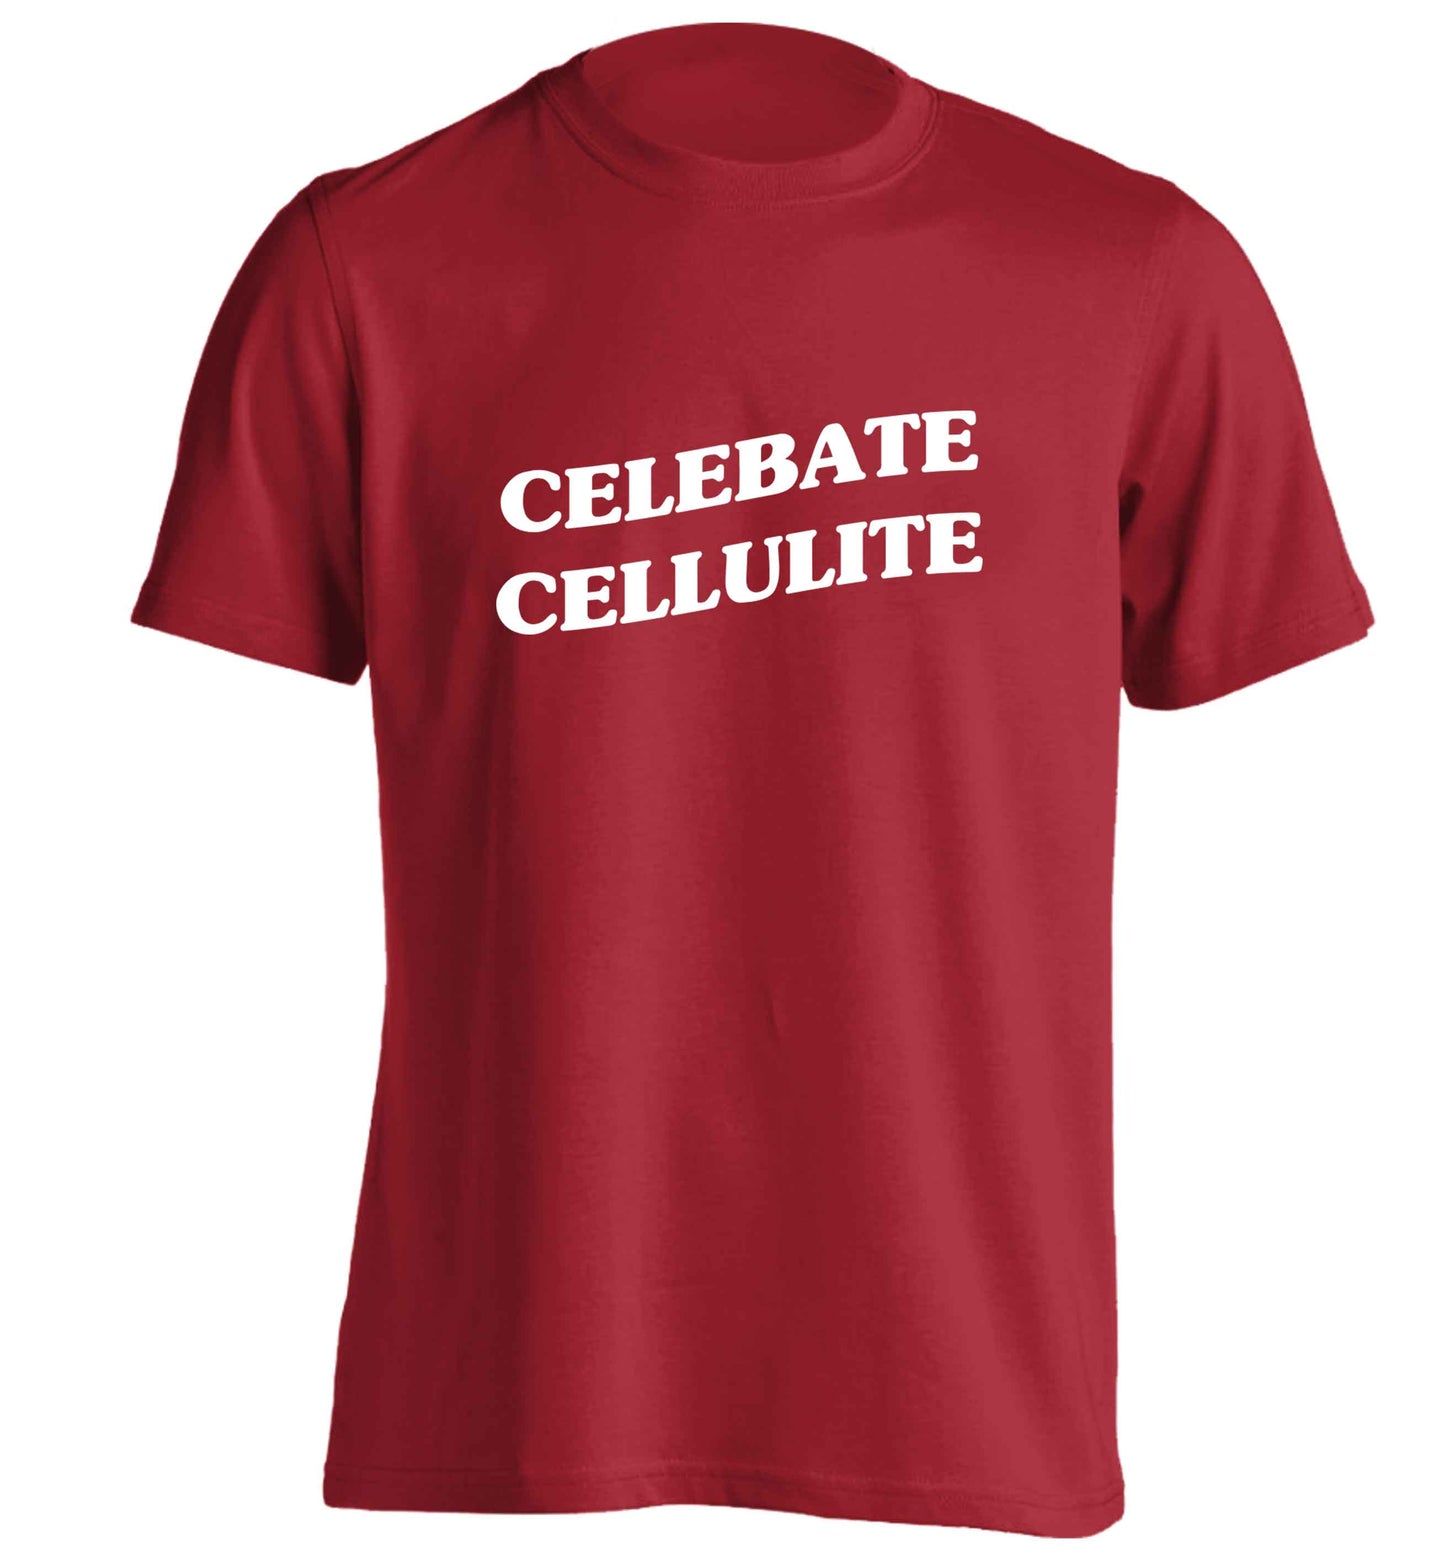 Celebrate cellulite adults unisex red Tshirt 2XL